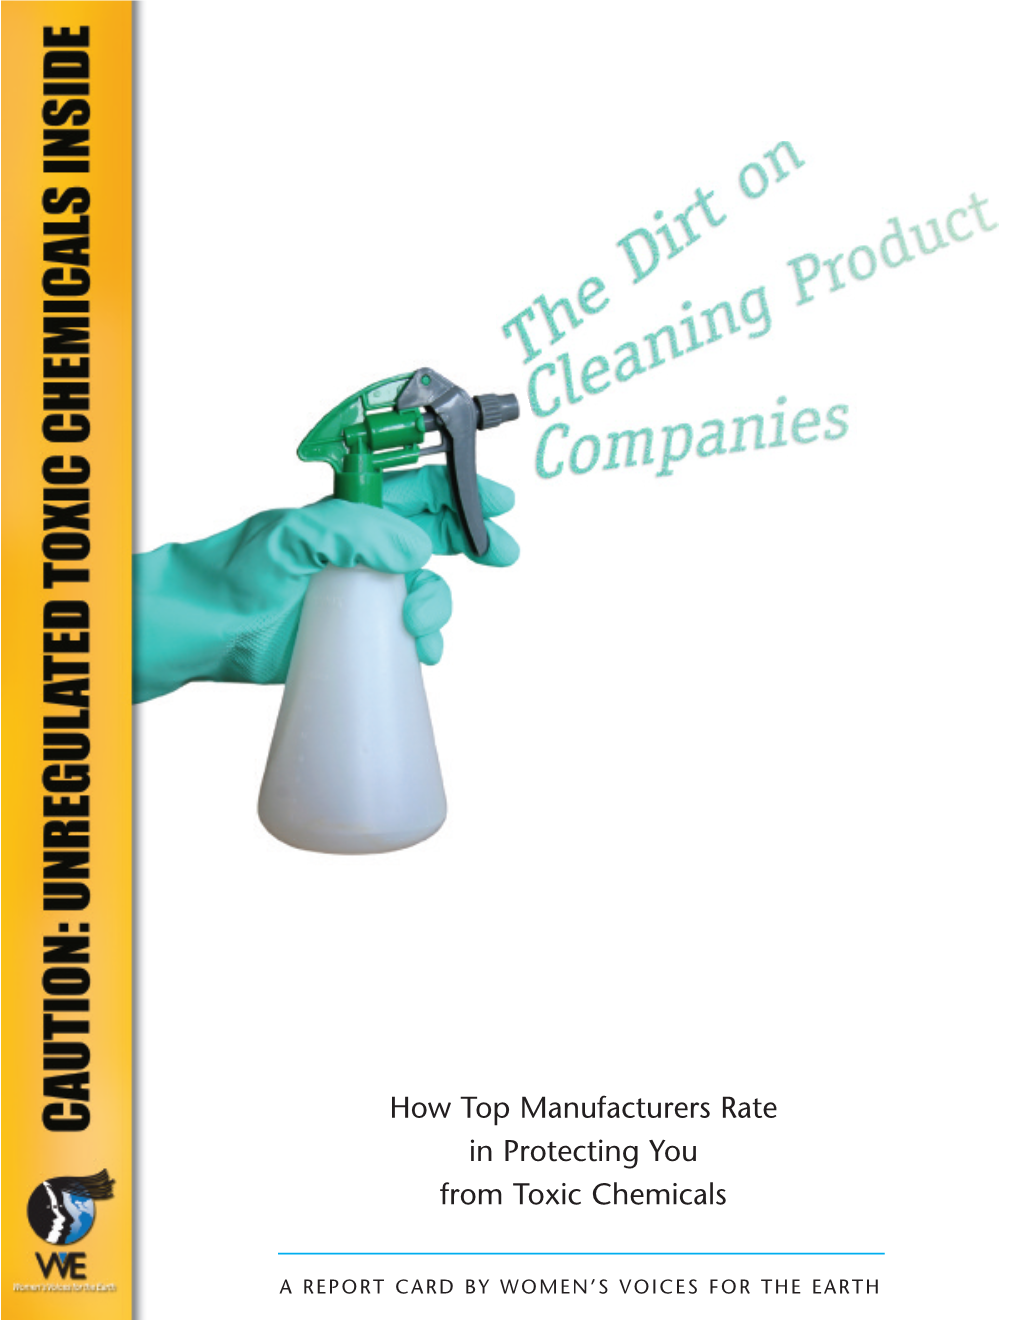 How Top Manufacturers Rate in Protecting You from Toxic Chemicals